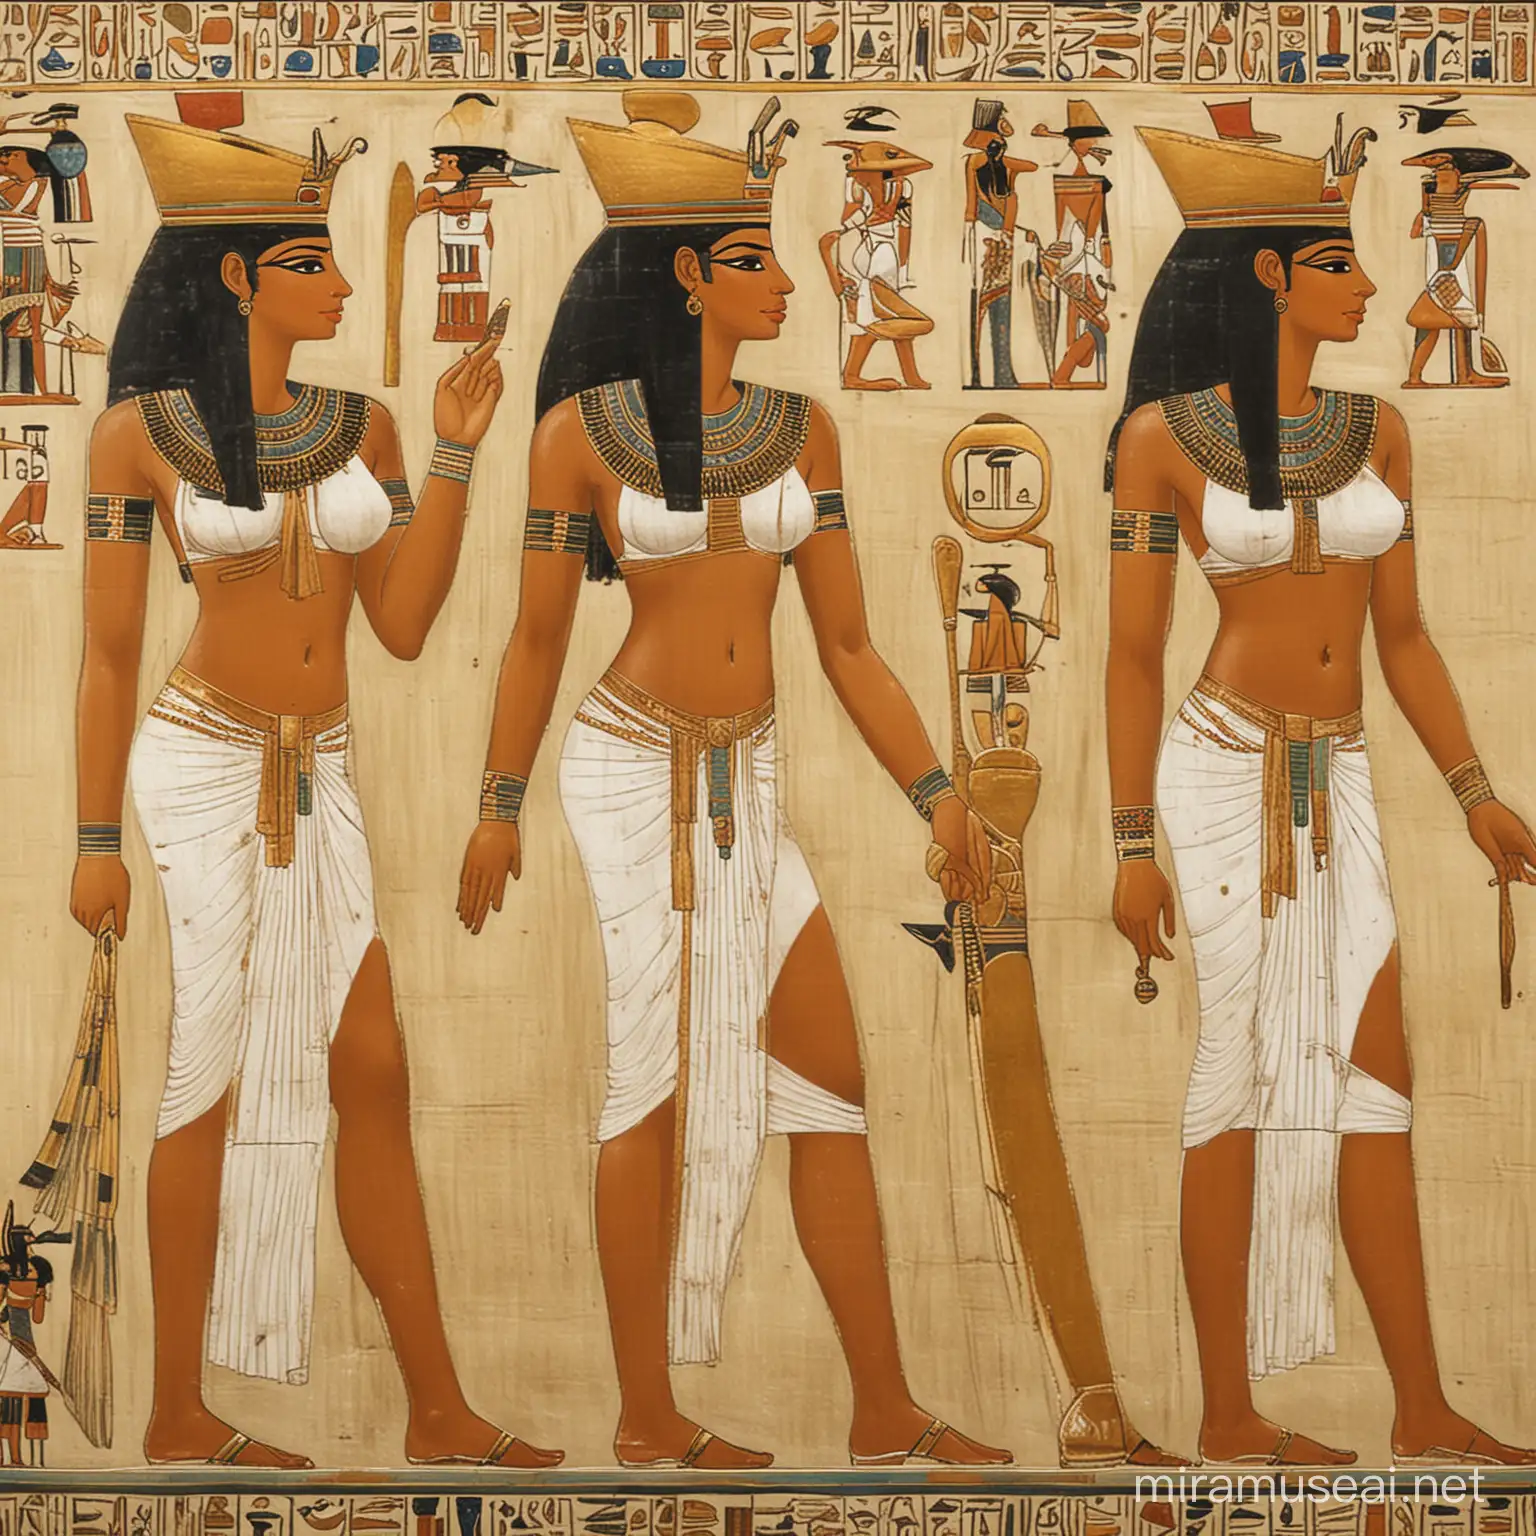 Three Egyptian Queens in 1900 BC Historical Portrayal with Graceful Figures